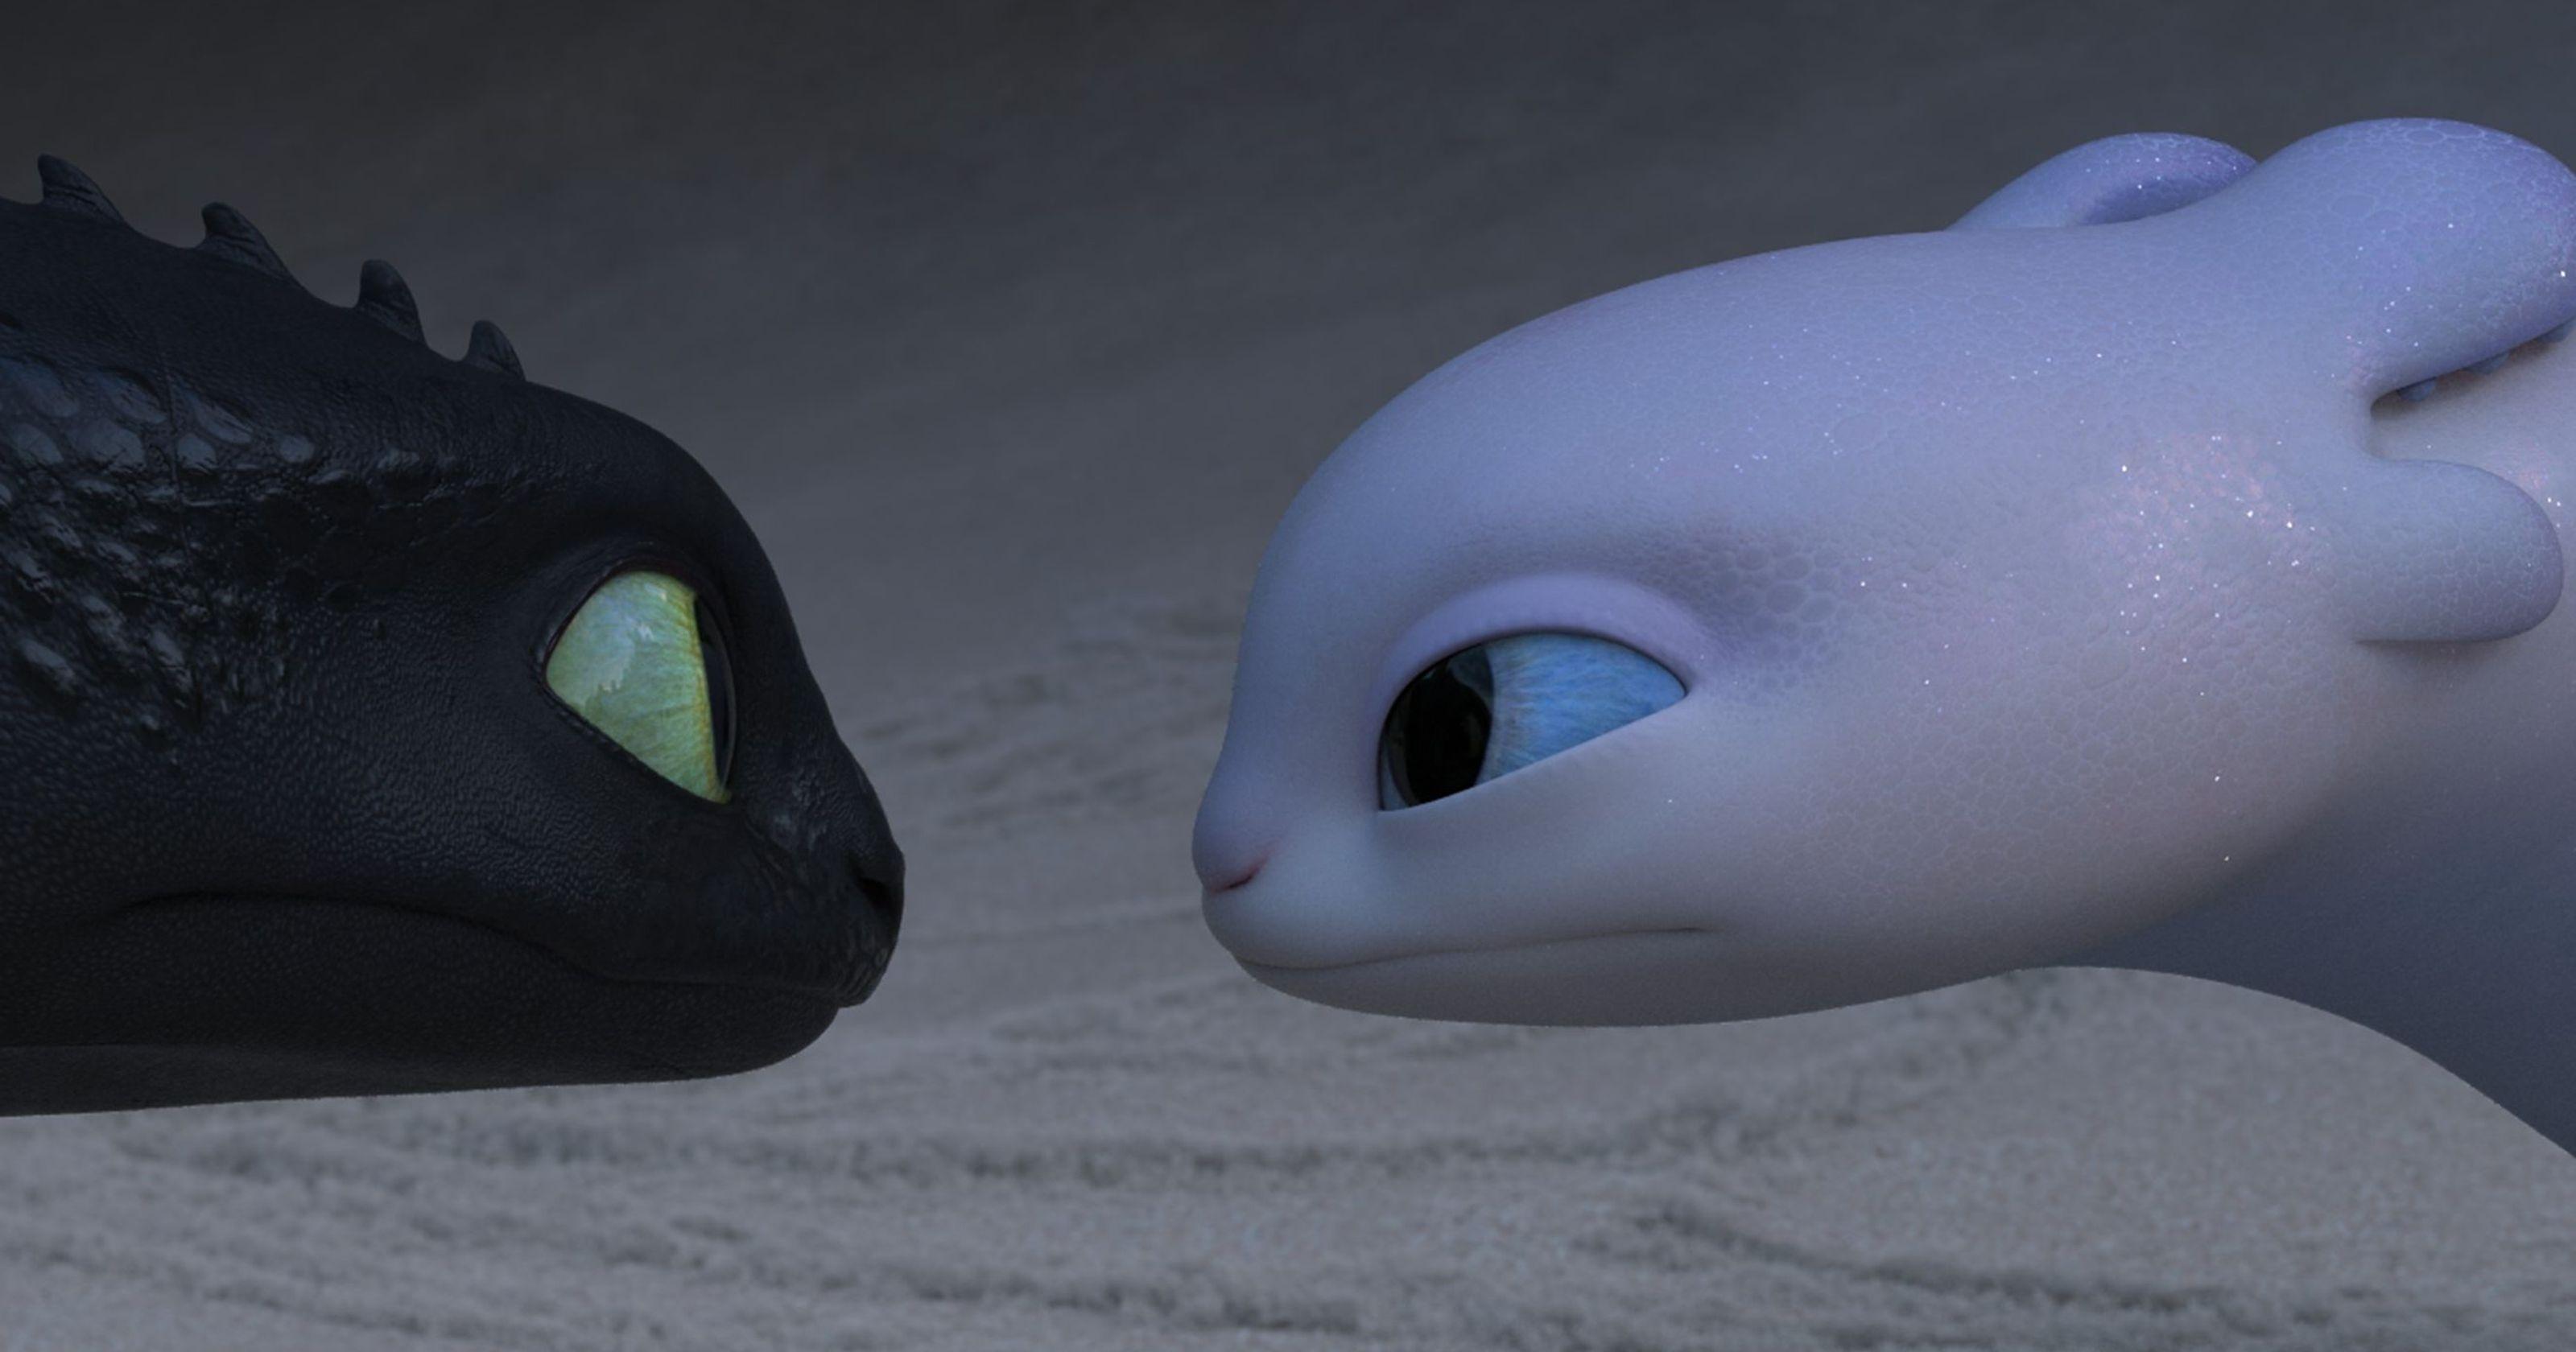 How to Train Your Dragon 3:' New trailer reveals Toothless is in love!